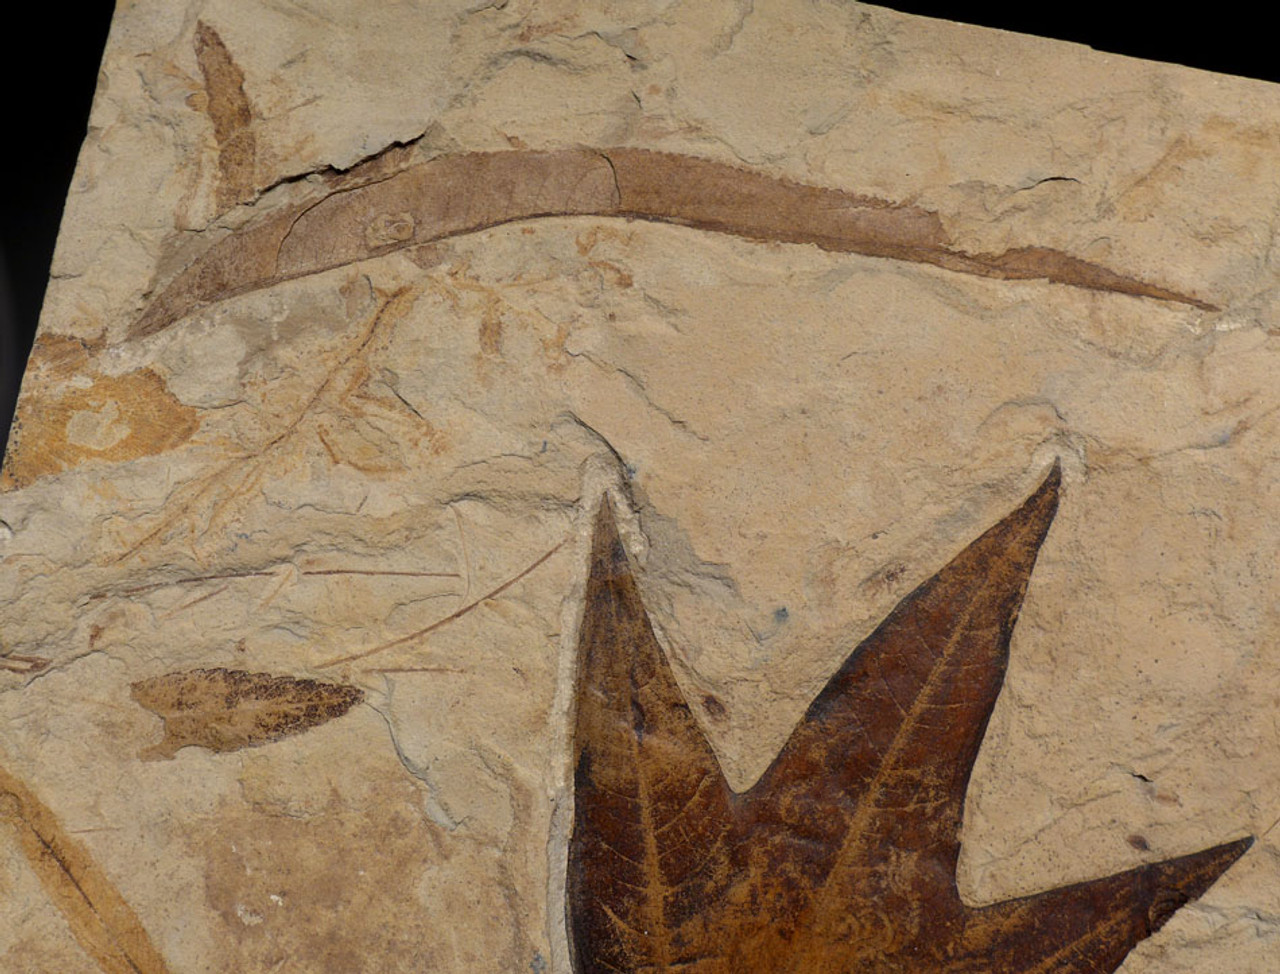 PL084 - SPECTACULAR LARGE FOSSIL SLAB WITH EOCENE FEATHER AND ASSOCIATED LEAF FOSSILS FROM THE GREEN RIVER FORMATION